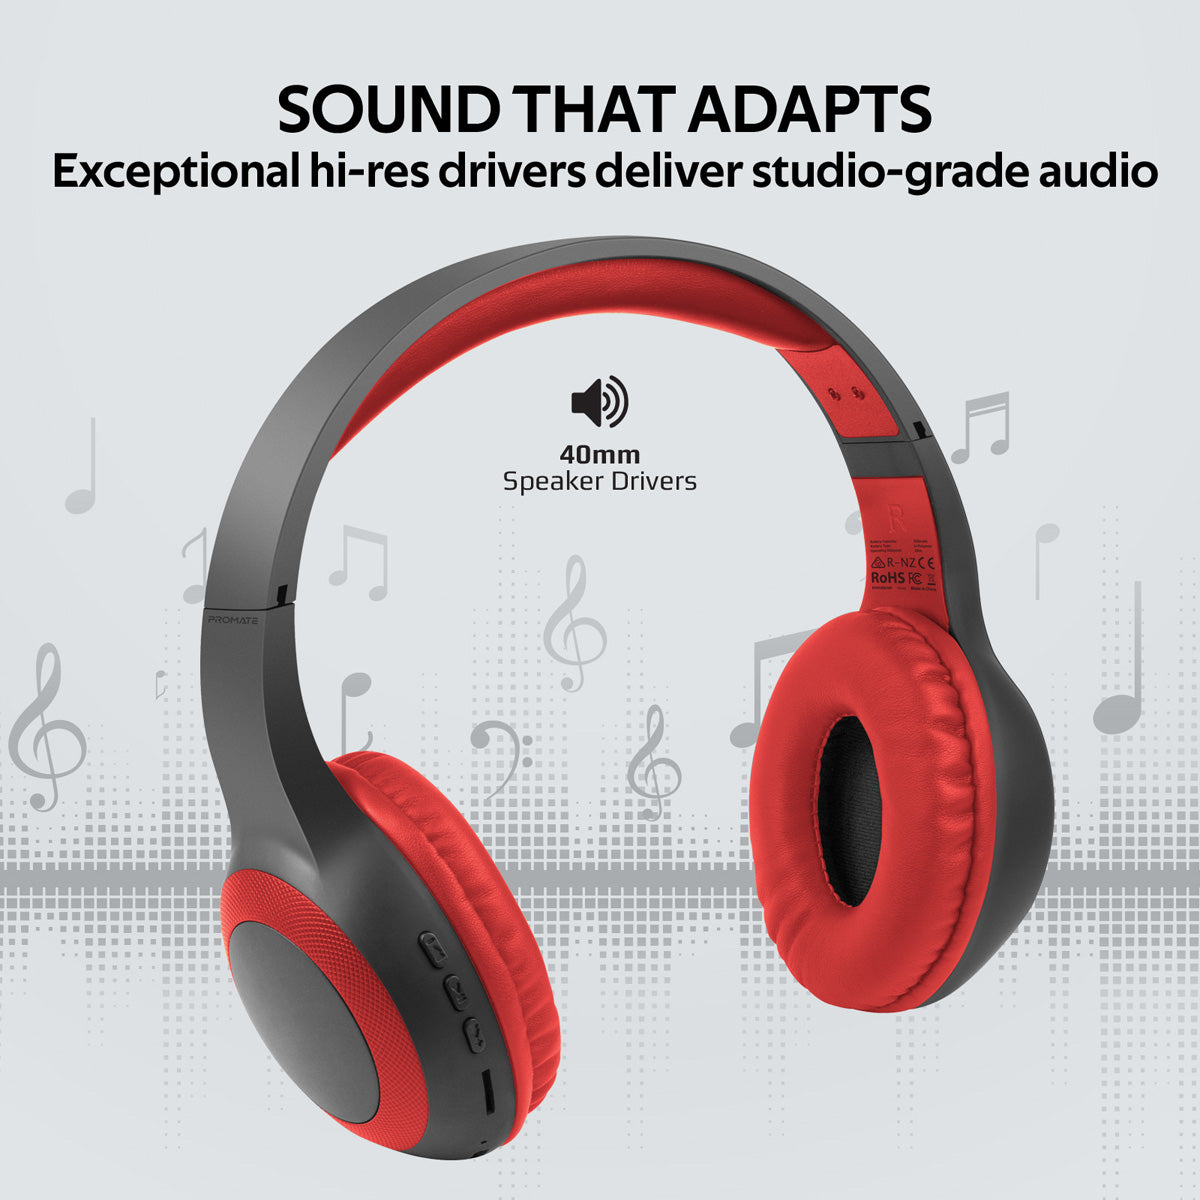 Promate - Bluetooth Headphone, Over-Ear Deep Bass Wired/Wireless Headphone with Long Paytime, Hi-Fi Sound, Built-In Mic, On-Ear Controls, Soft Earpads, MicroSD Card Slot and AUX Port for iPhone, Samsung, iPad Pro, LaBoca Red